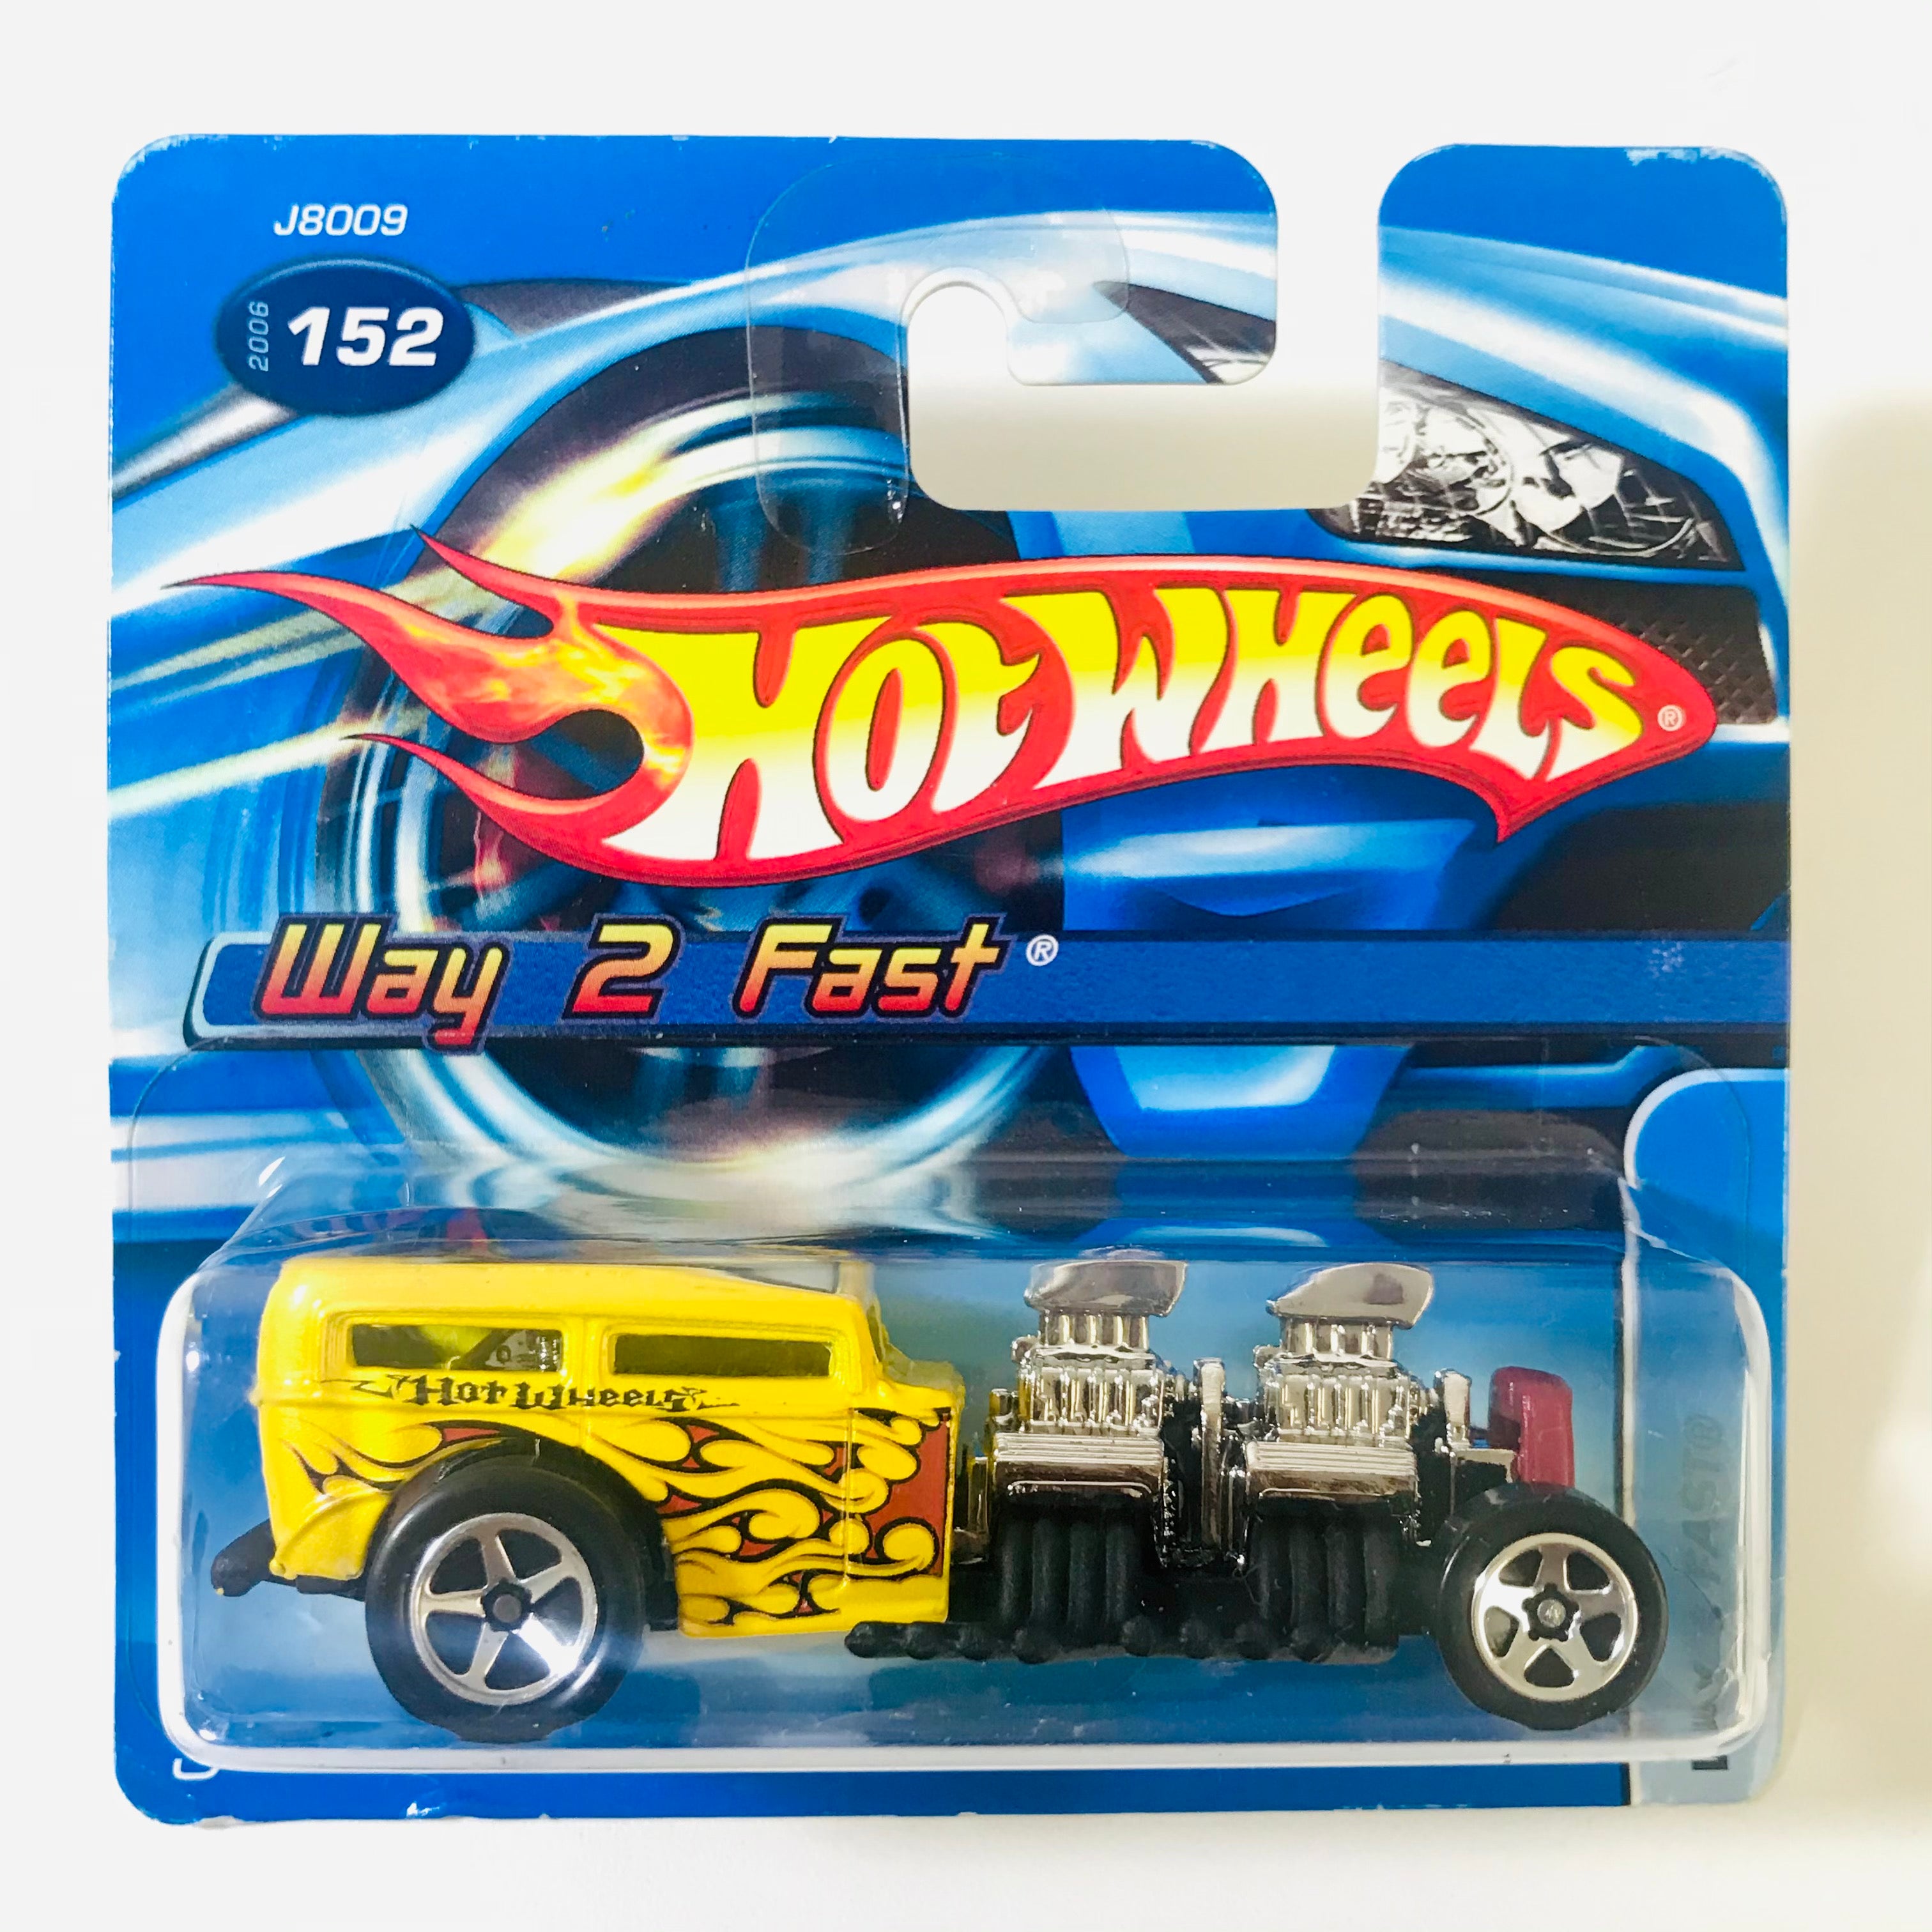 2006 Hot Wheels Way Fast 152 amarillo 5SP Blíster Europeo